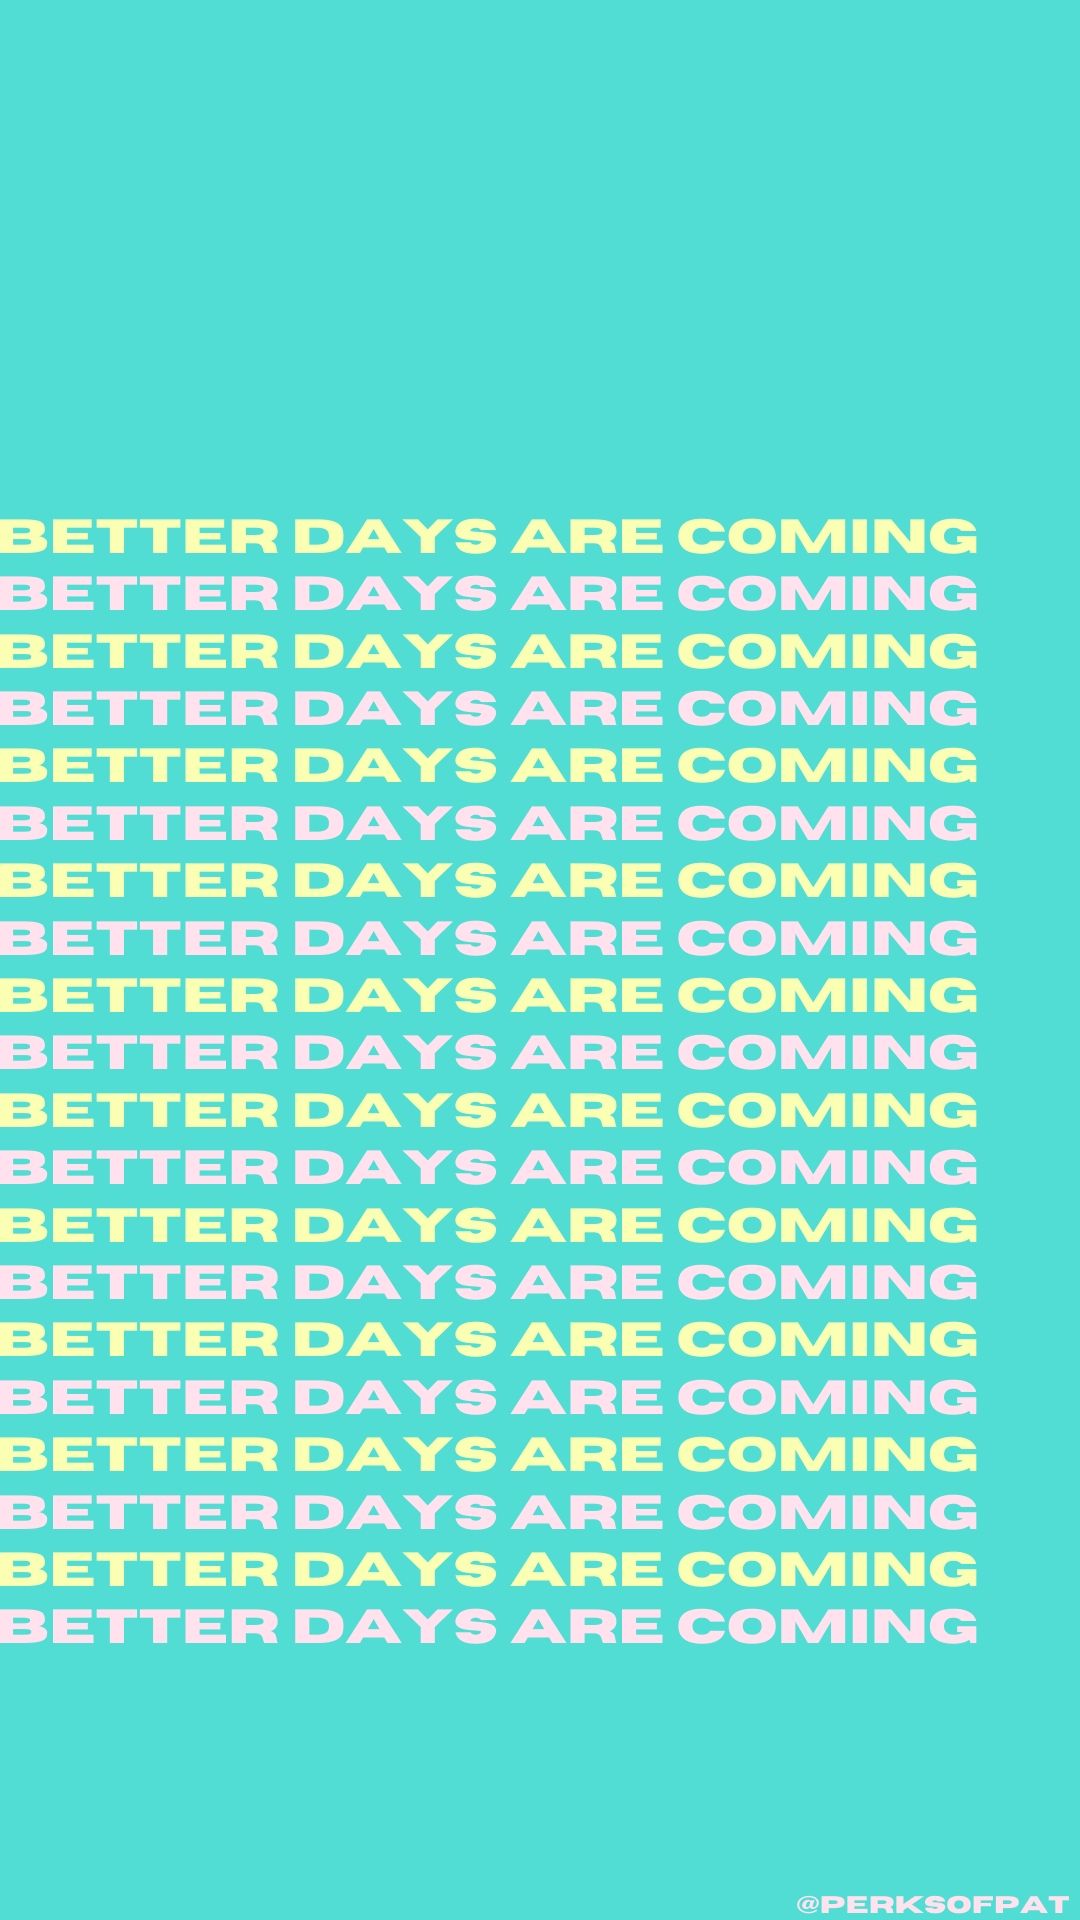 Better Days Are Coming Wallpaper. Free .com